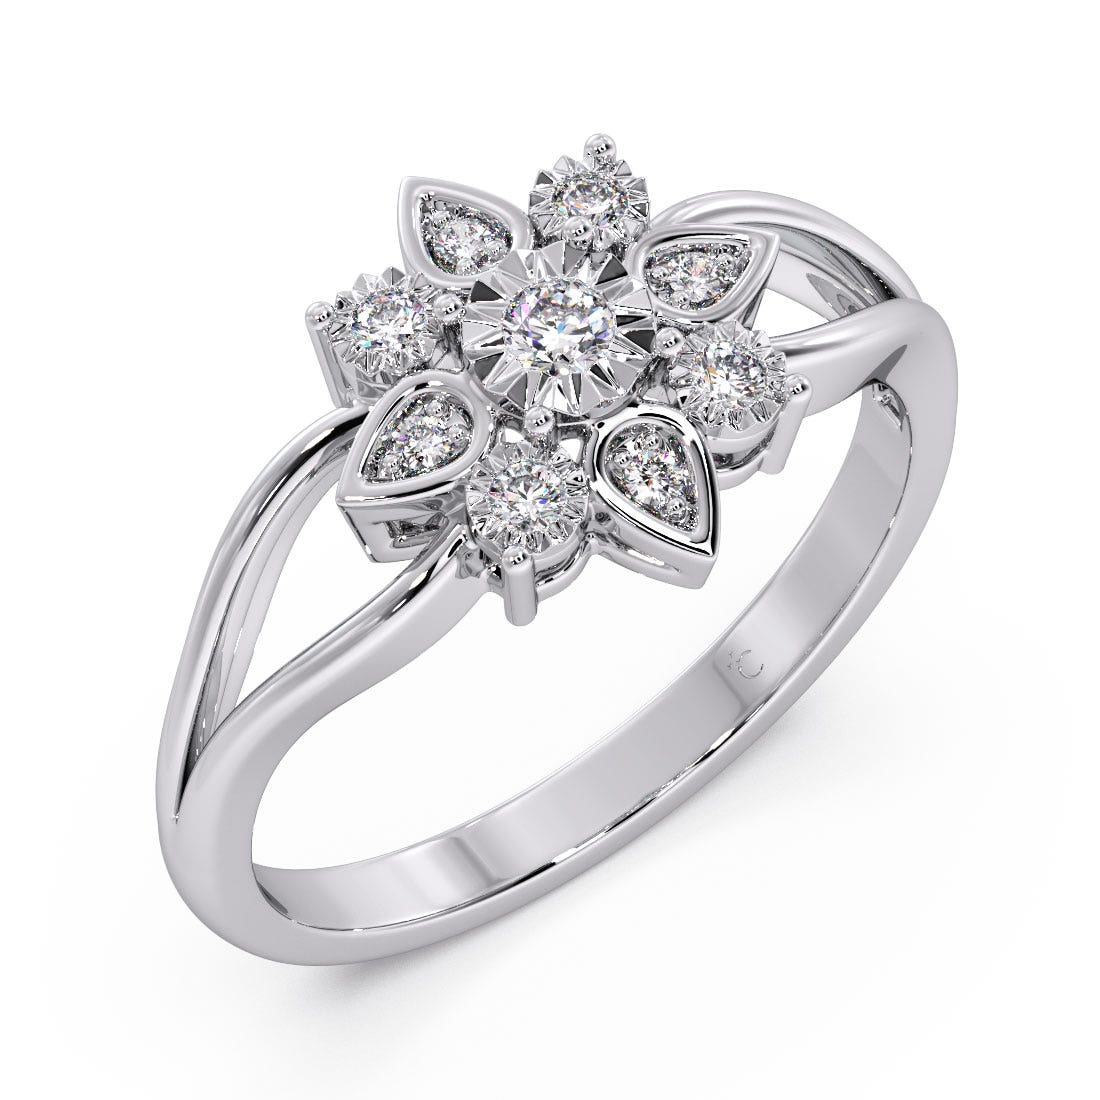 Northstar Miracle Plate Diamond Ring